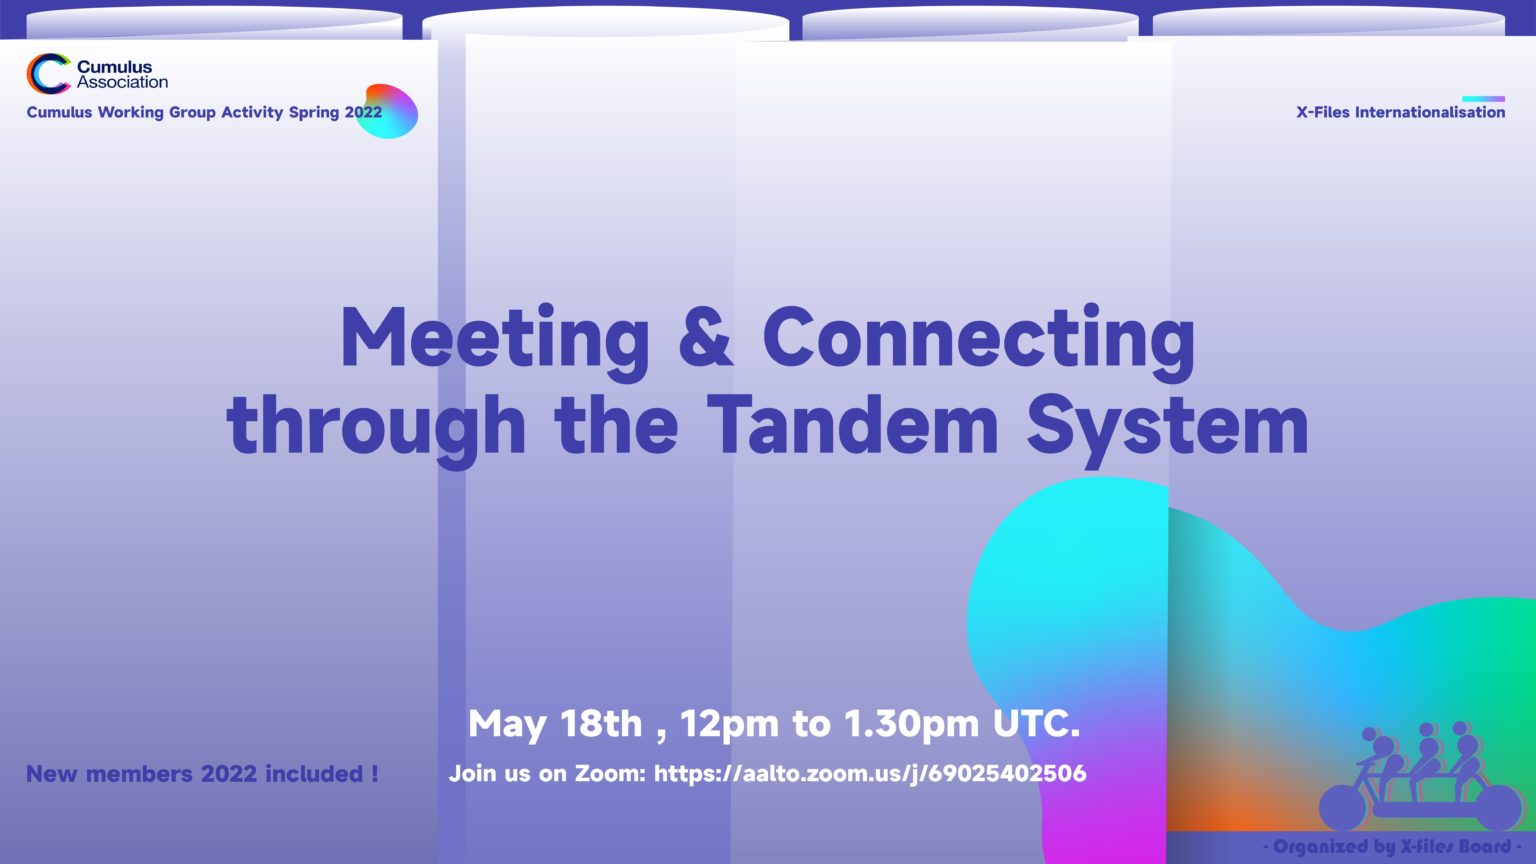 Meeting & Connecting through the Tandem System Cumulus Association